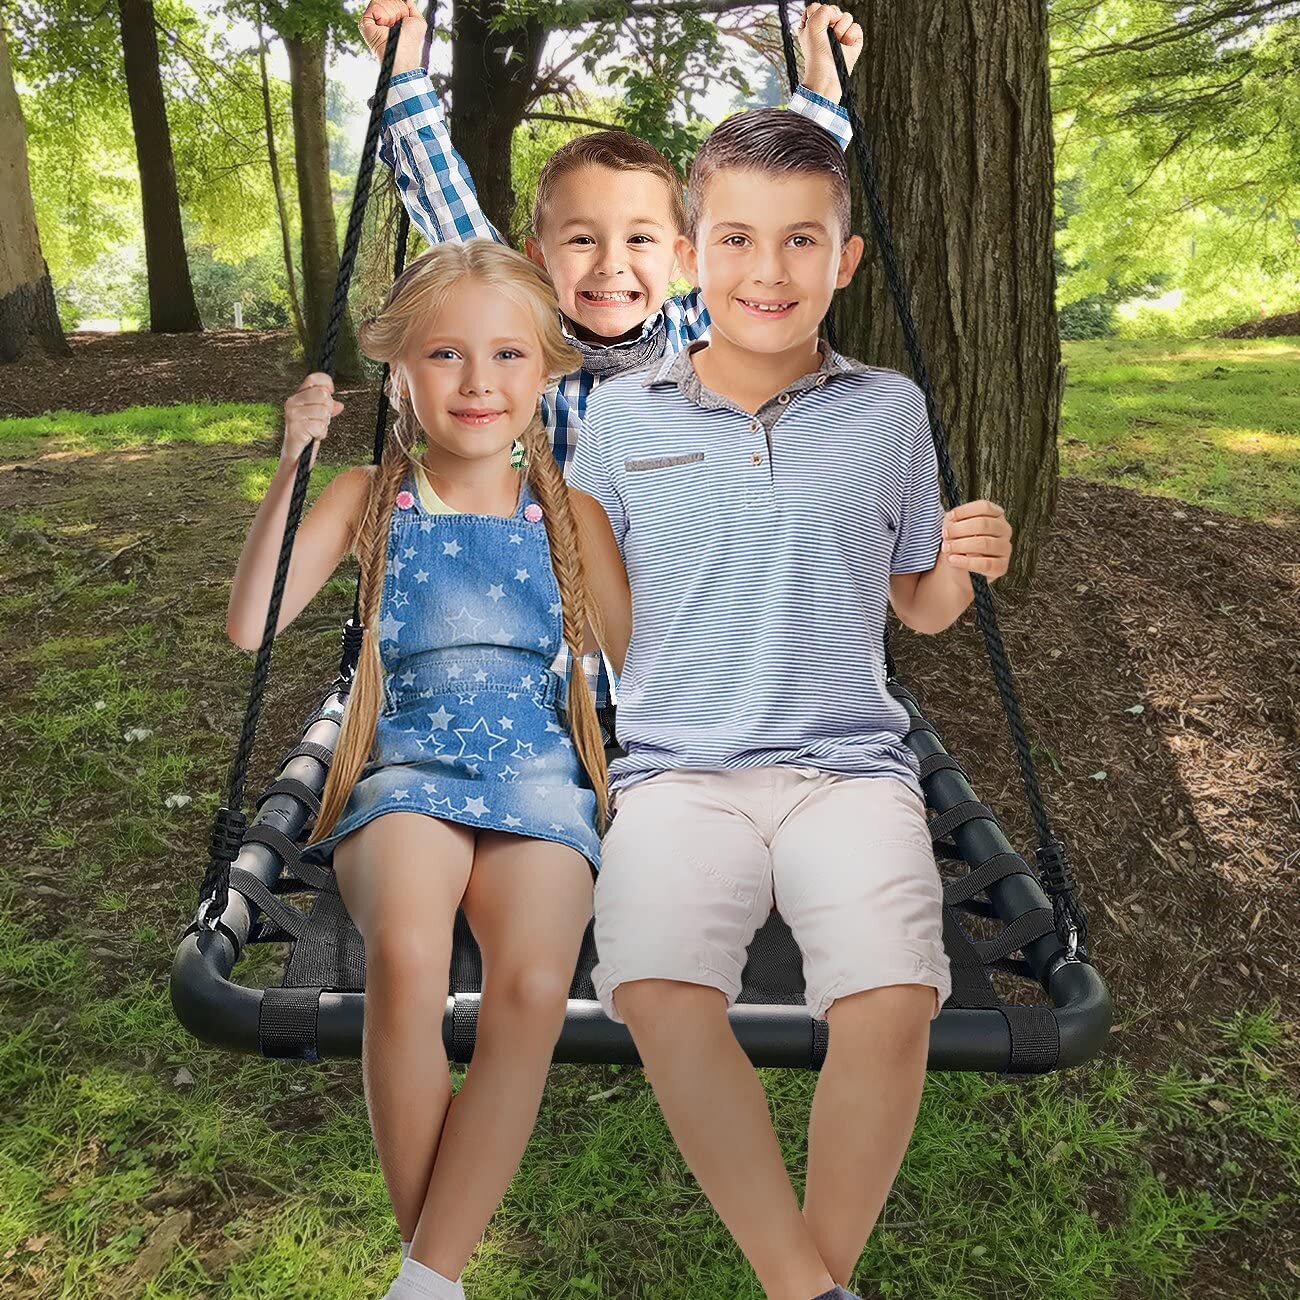 Norbi Round Tree Swing 440 Lb Weight Durable Steel Frame